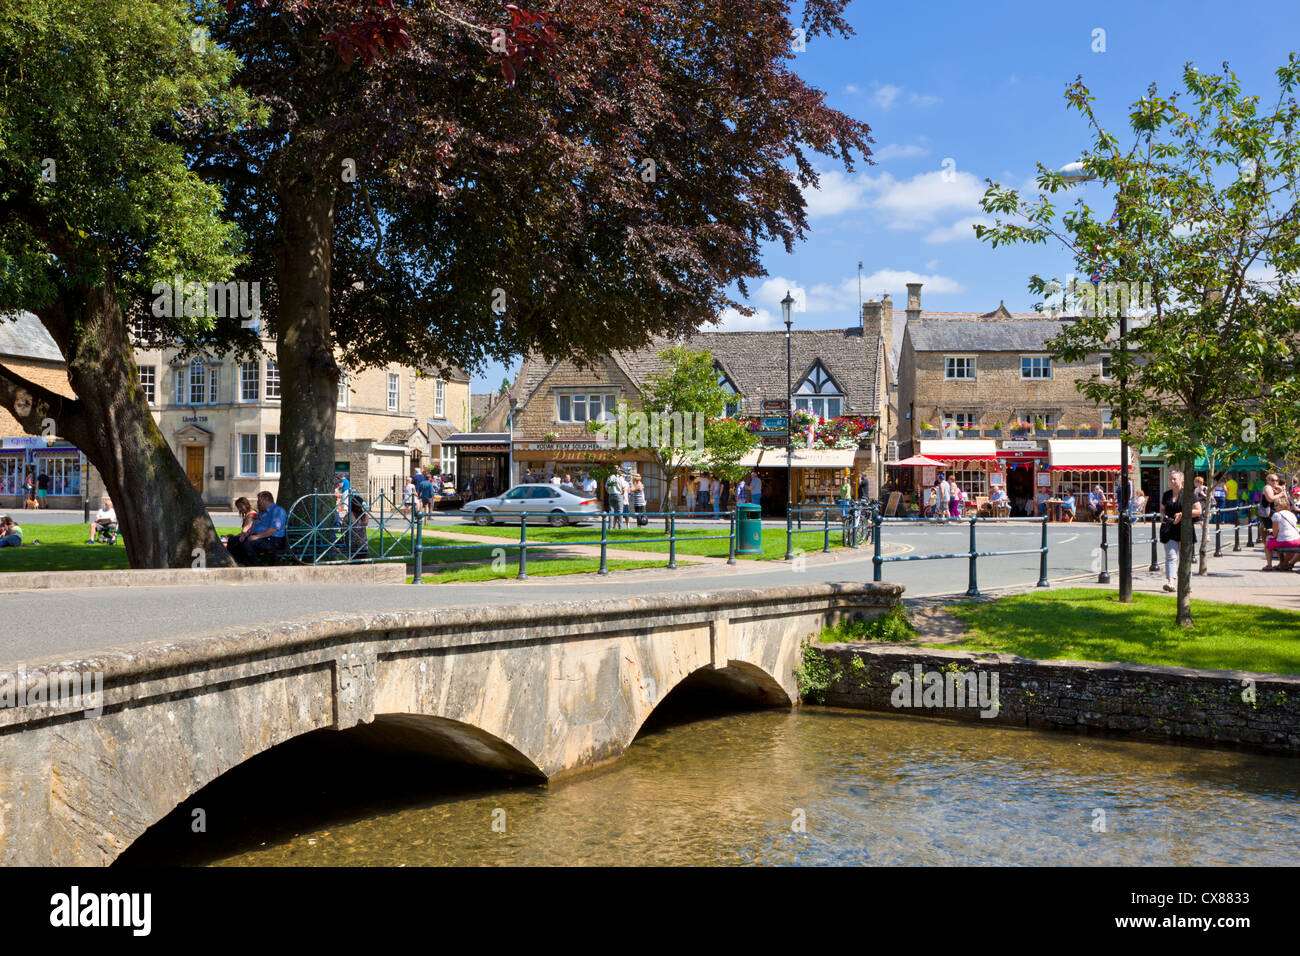 Cotswolds village of Bourton on the water with Bridge over the River Windrush in Bourton on the Water Cotswolds Gloucestershire England UK GB Europe Stock Photo